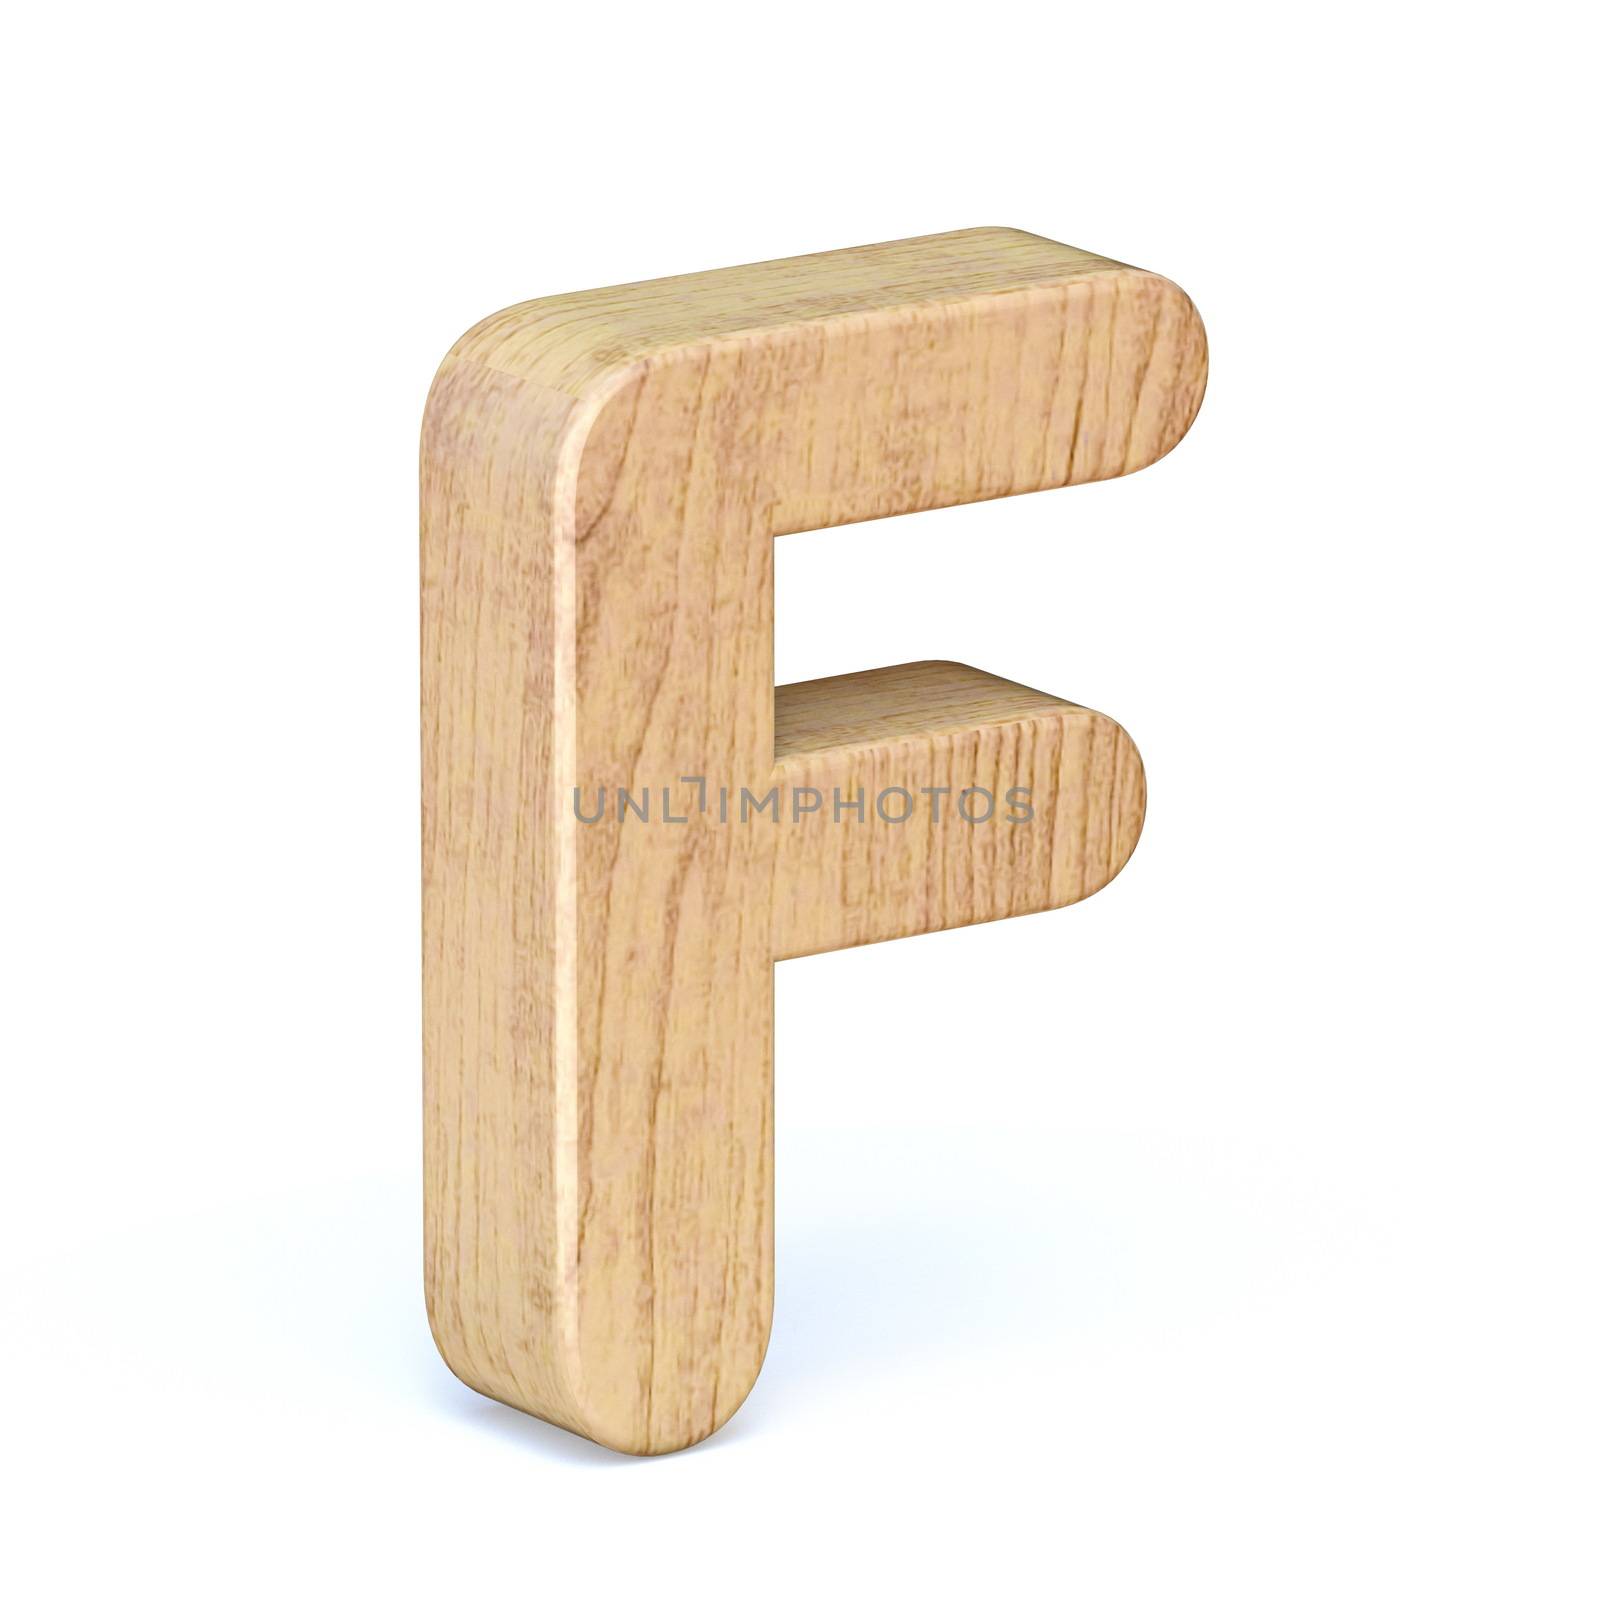 Rounded wooden font Letter F 3D render illustration isolated on white background